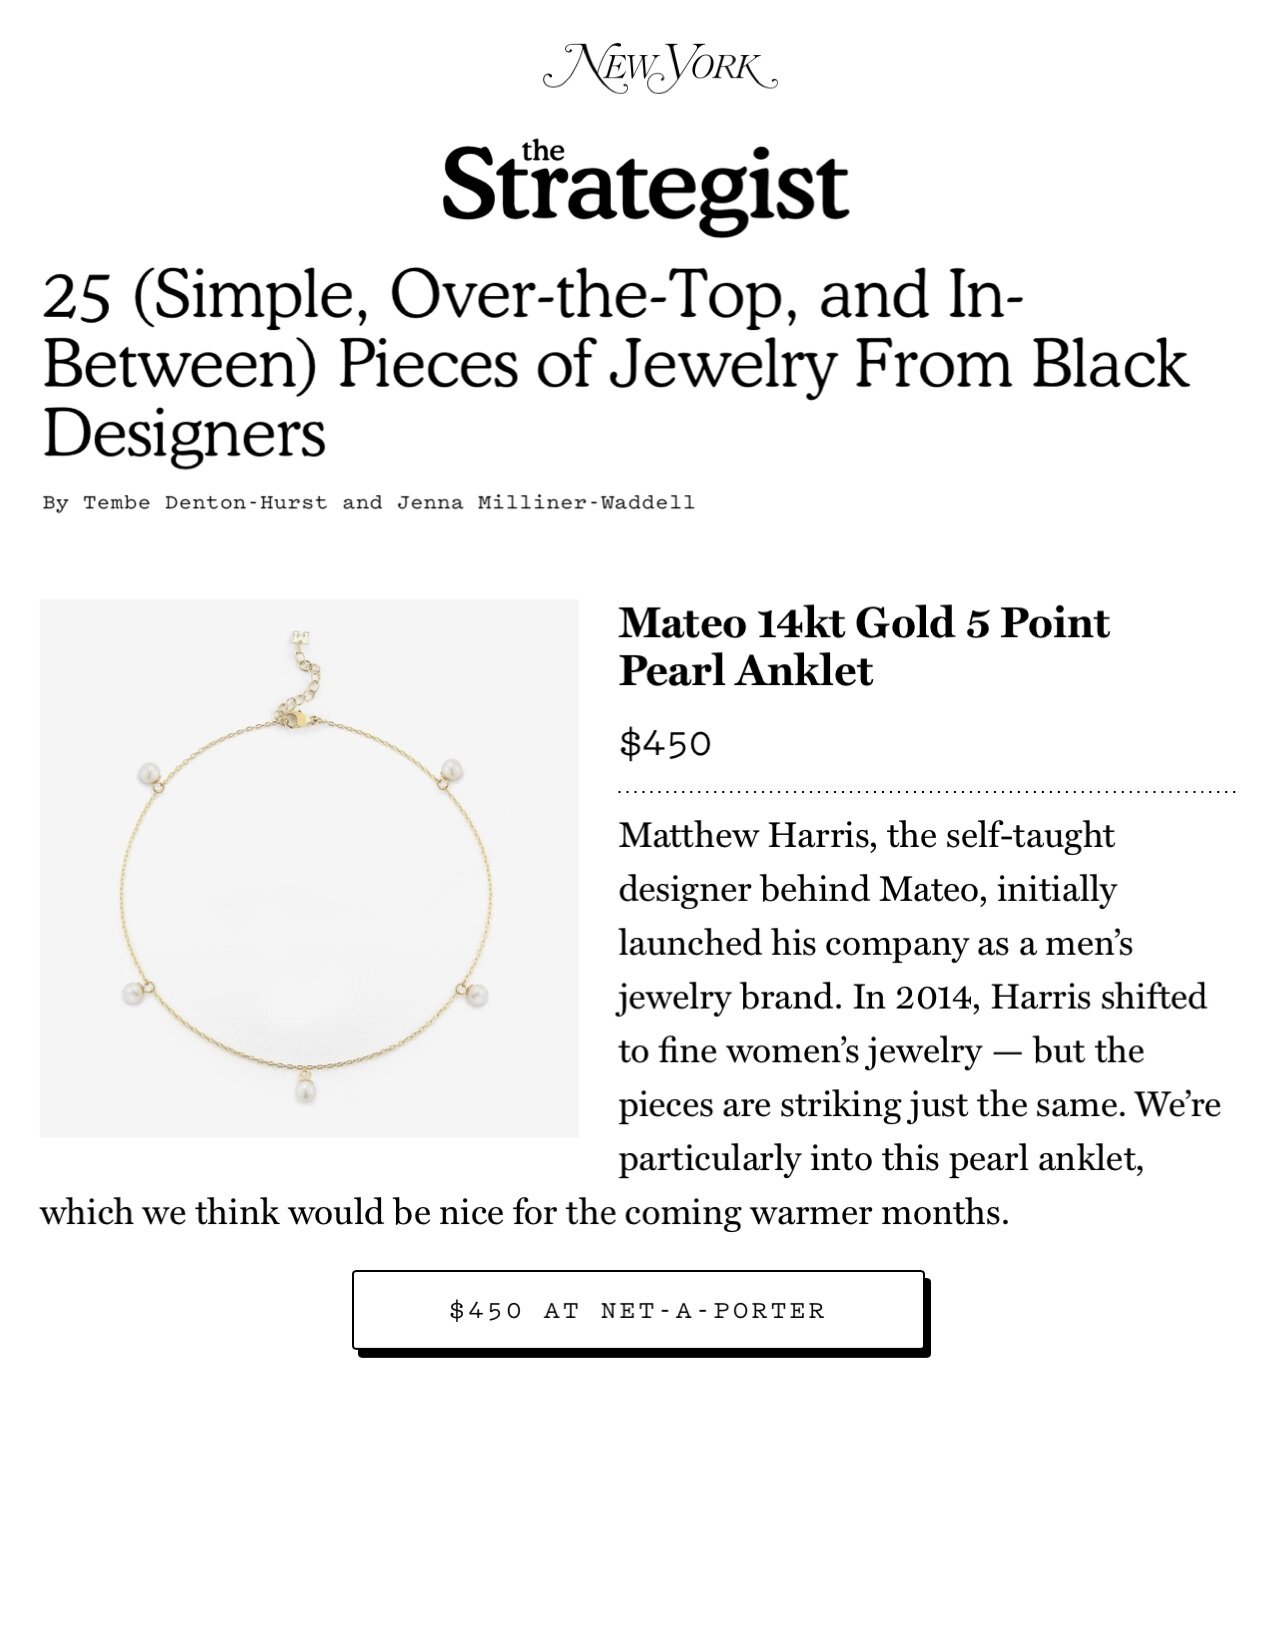 MATEO on NYMag/TheStrategist.com, March 2021